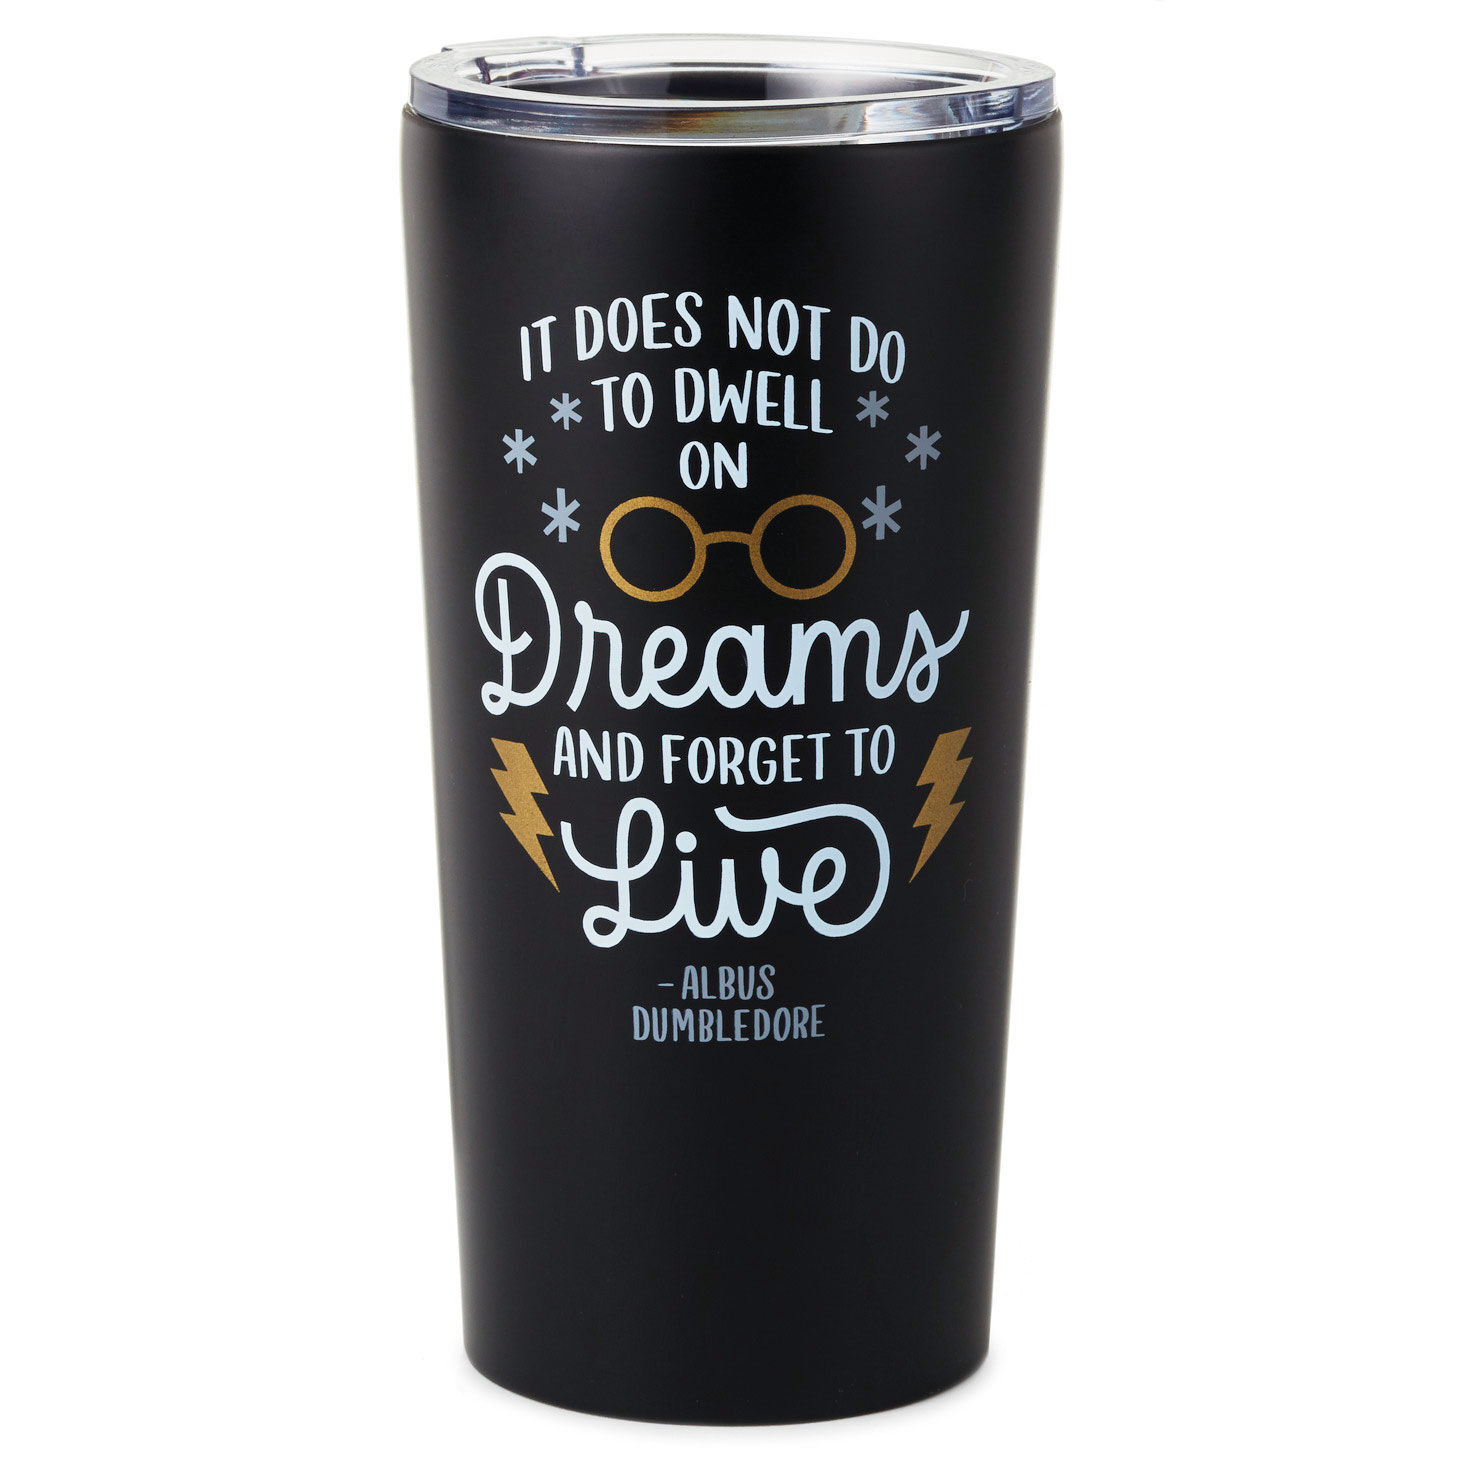 https://www.hallmark.com/dw/image/v2/AALB_PRD/on/demandware.static/-/Sites-hallmark-master/default/dwe4b13f3c/images/finished-goods/products/1HPO1082/BlackWhiteGold-Dumbledore-Quote-Metal-Cup-With-Lid_1HPO1082_01.jpg?sfrm=jpg